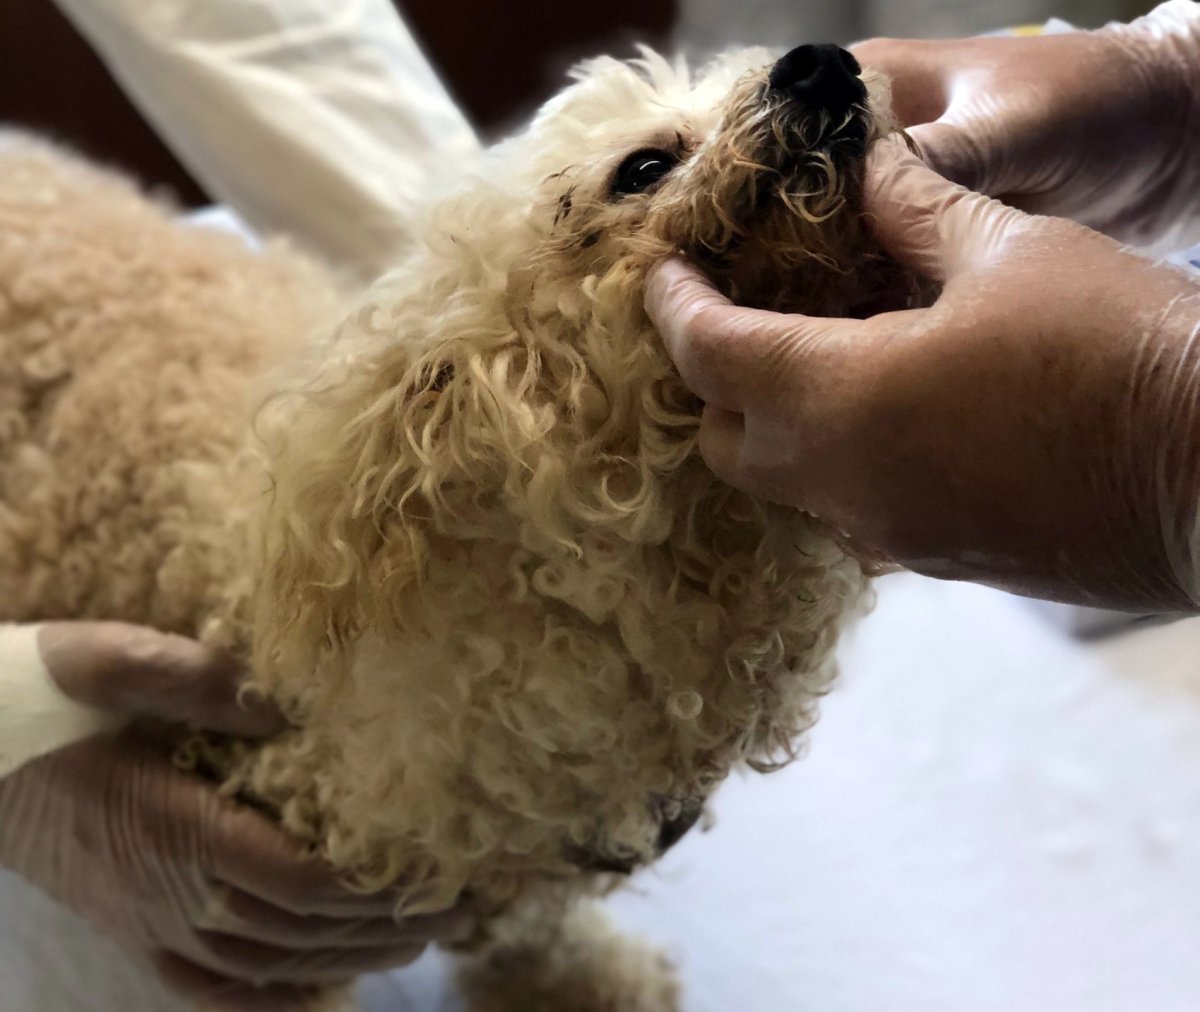 One of 15 neglected dogs seized from a Fraser Valley breeder on Wednesday.